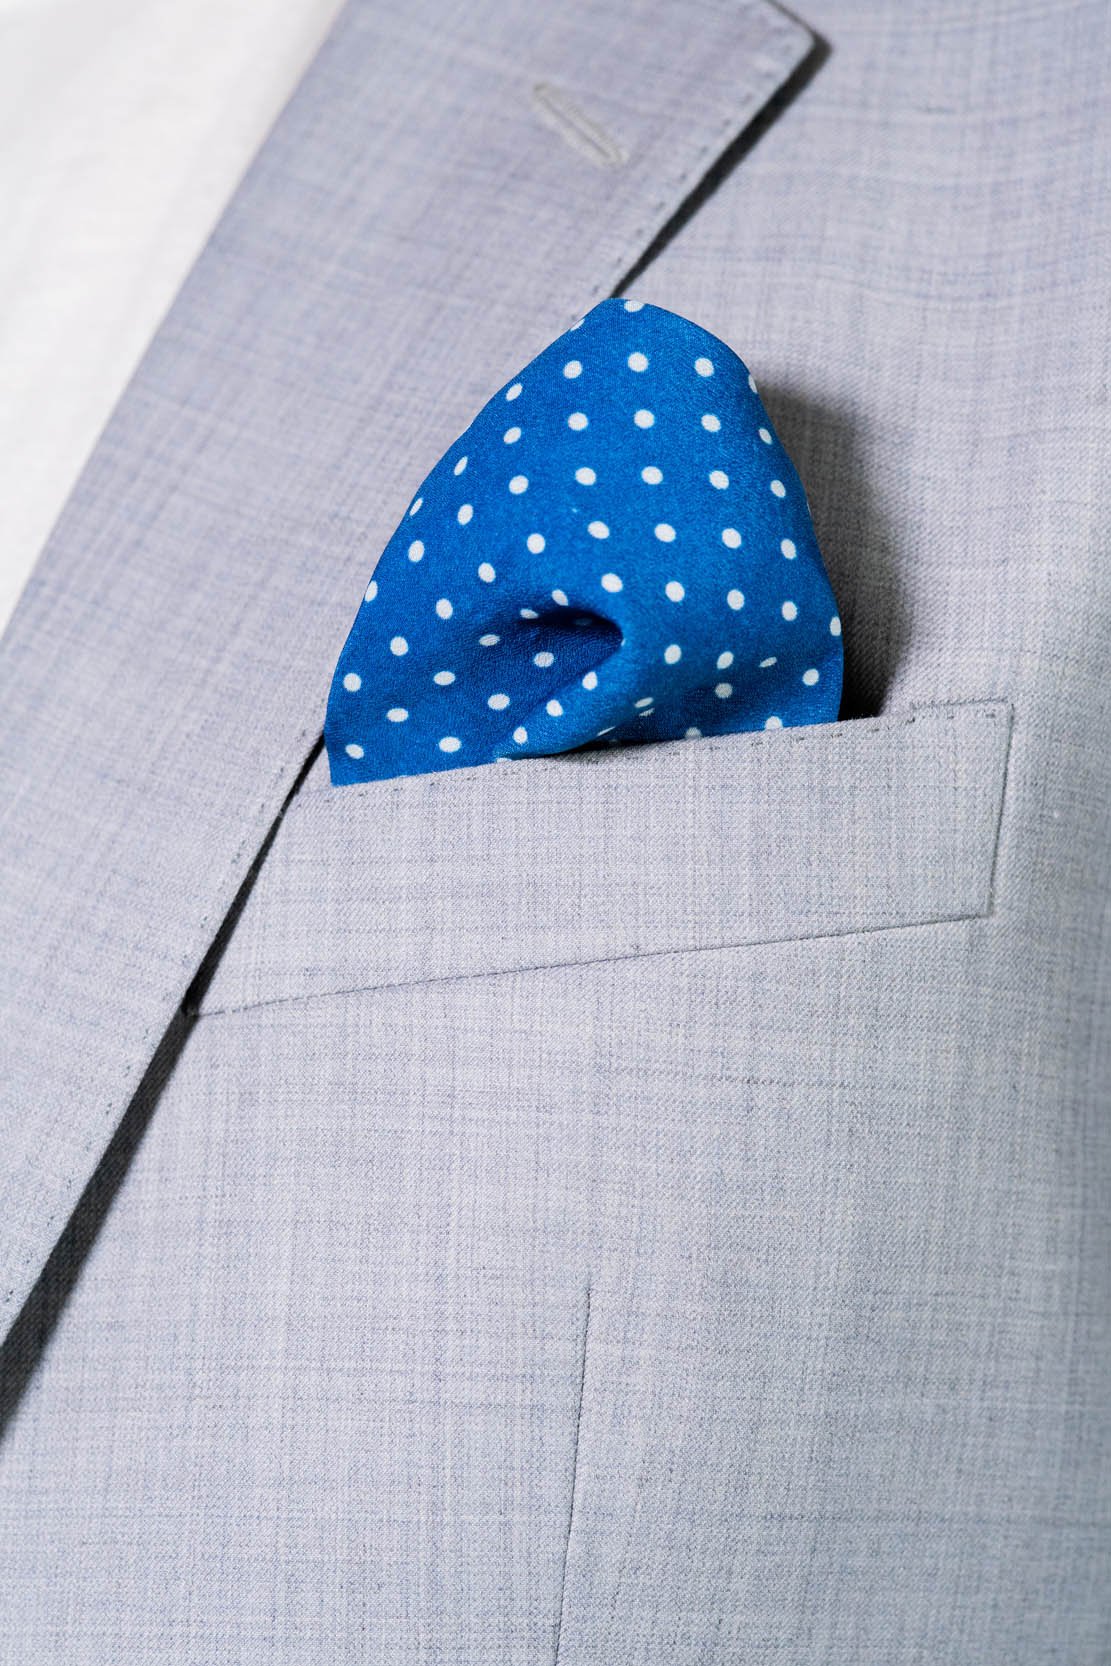 RARE CUT's Royal Dots Pocket Square Worn in a Suit Jacket